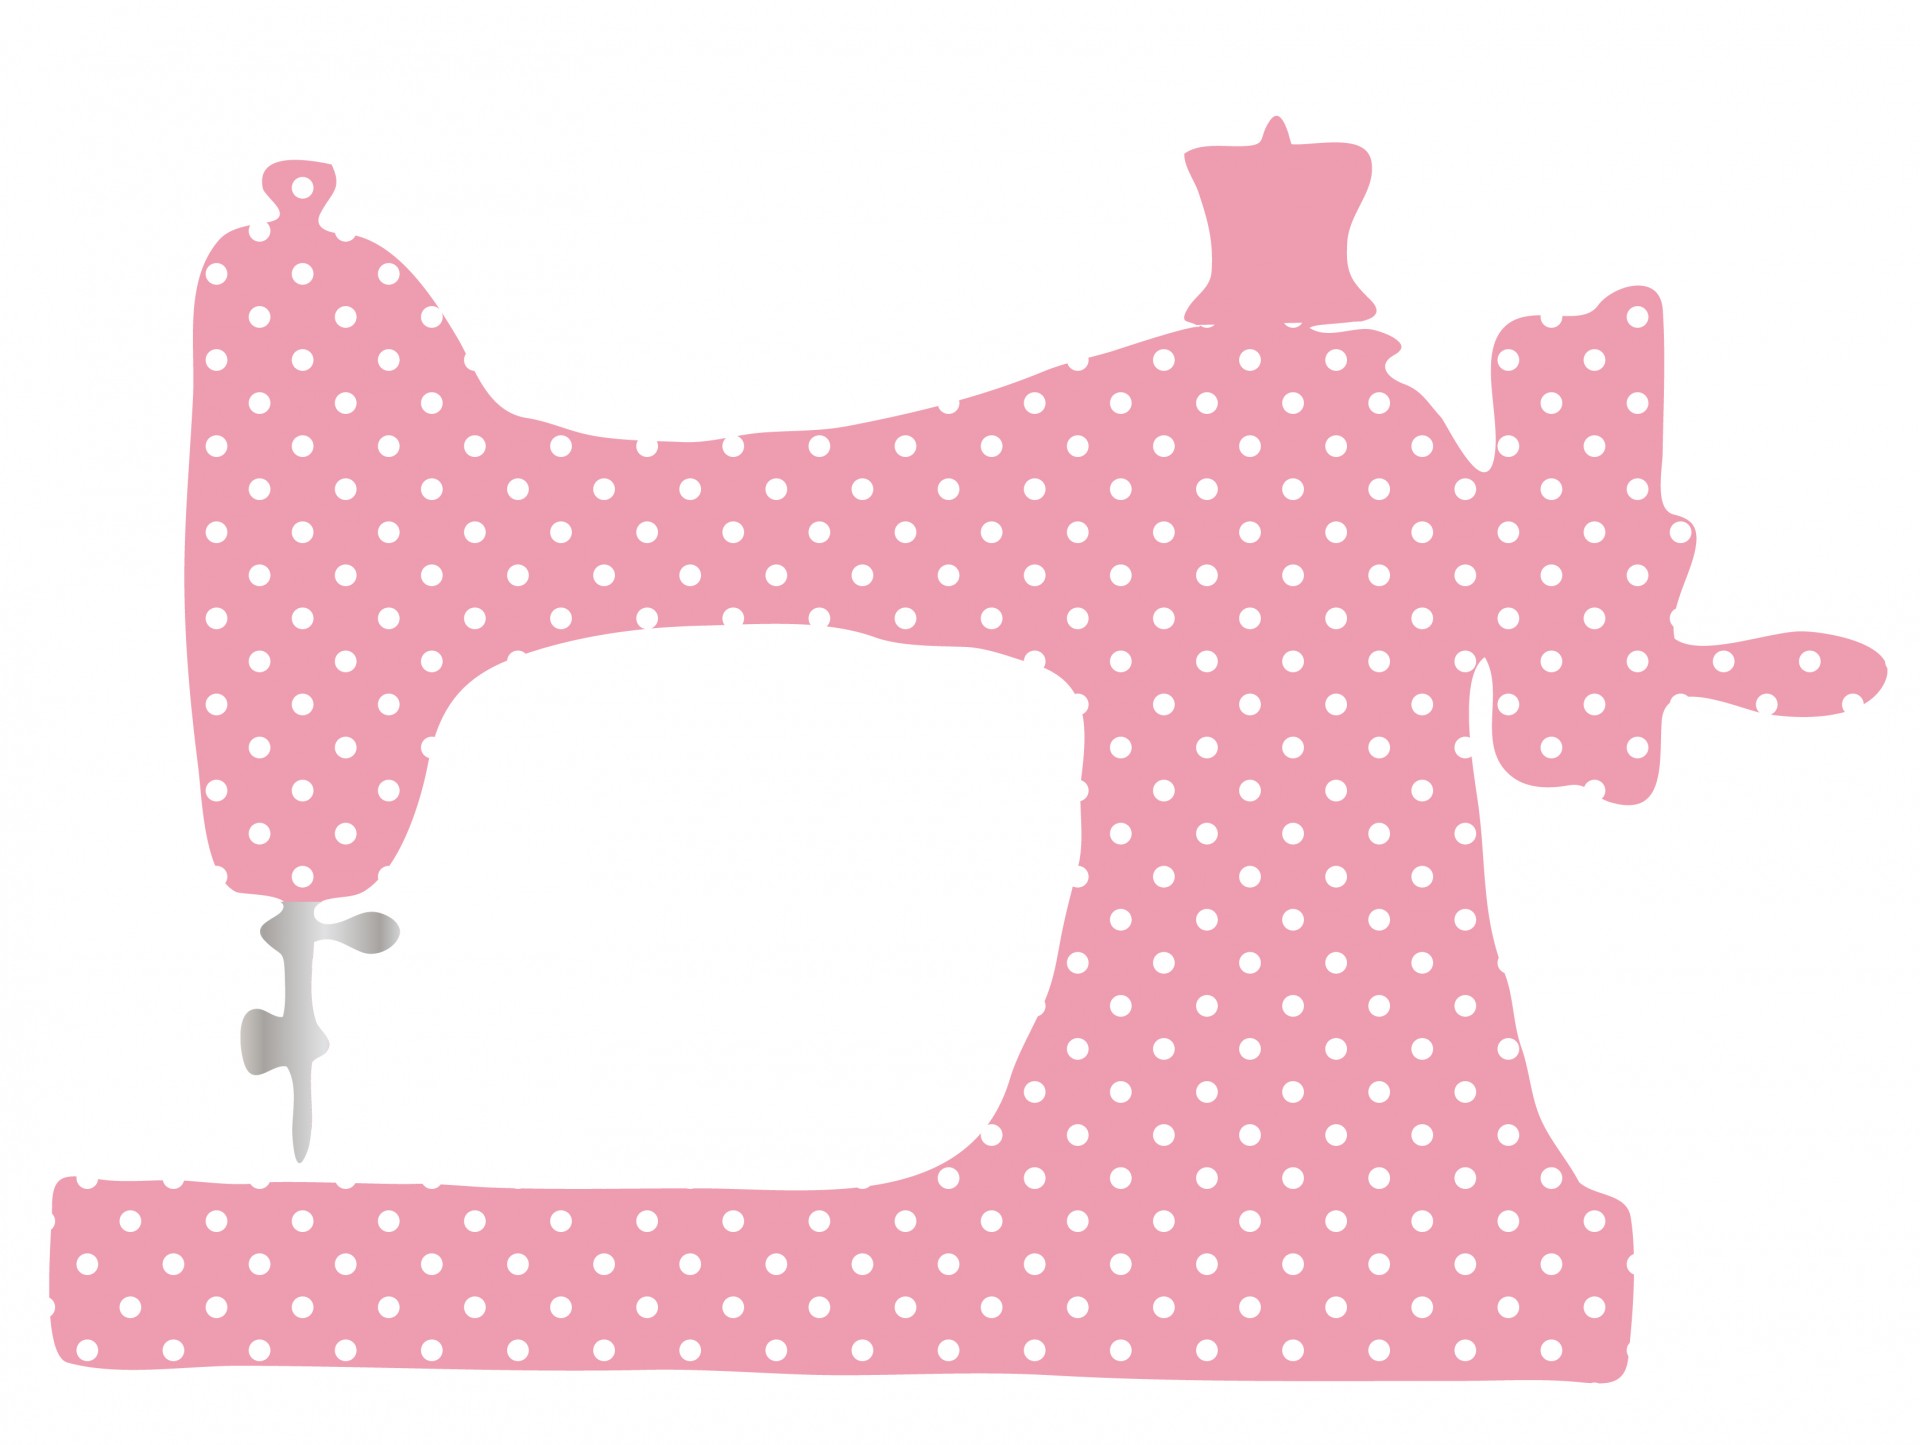 Sewing machines illustrations 